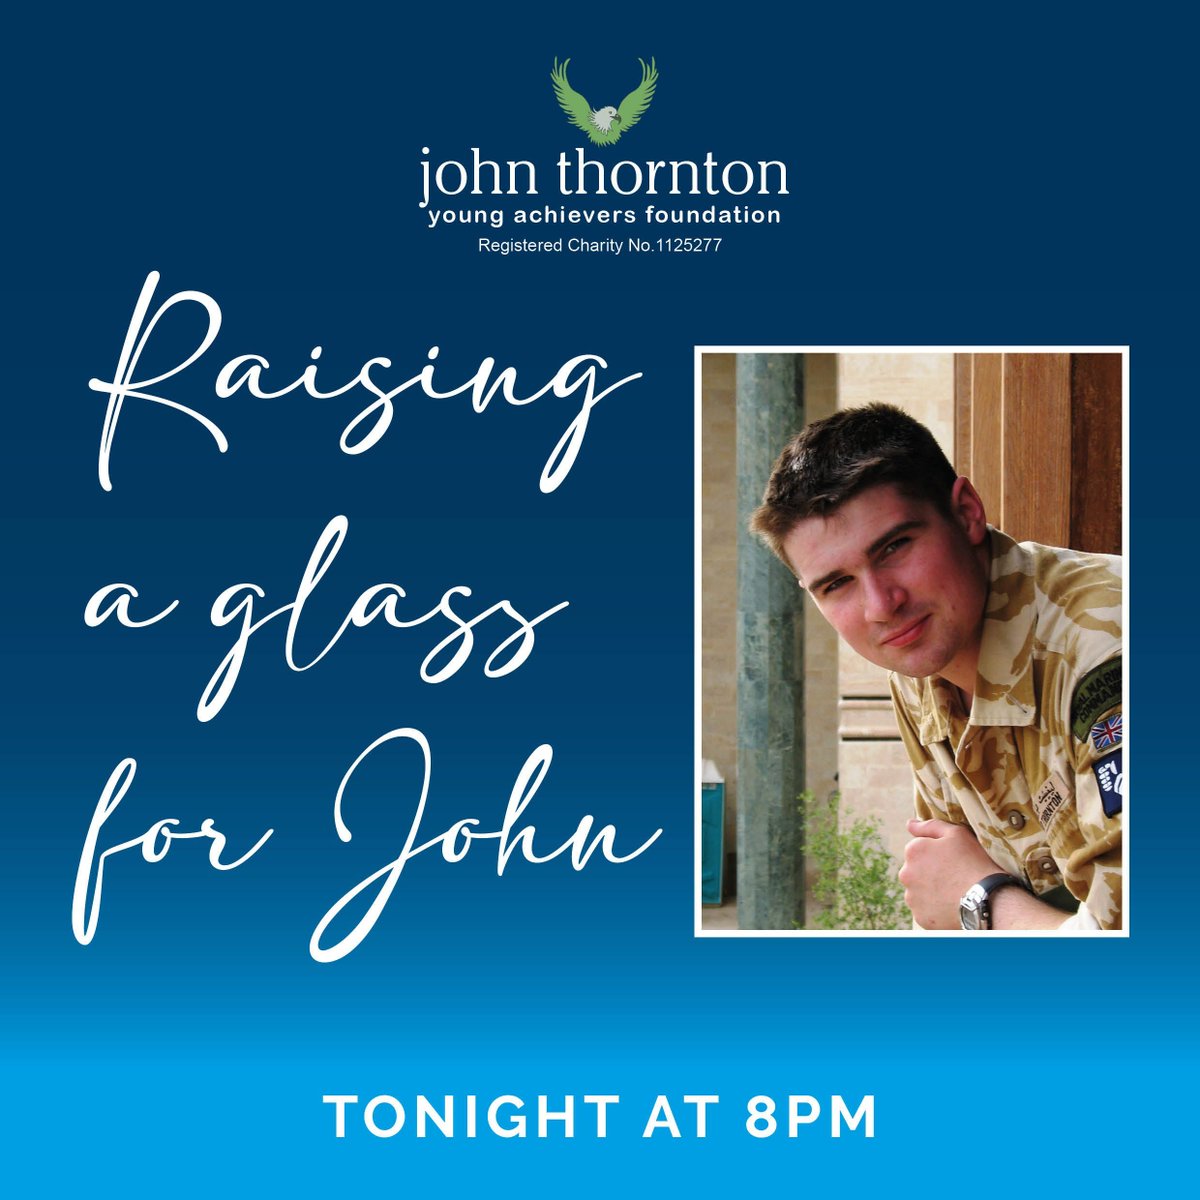 Today marks 16 years since we lost John and we hope that you will join us in raising a glass at 8pm this evening in his name ❤️🥂 Your legacy lives on in the £1million awarded by the JTYAF to change young peoples' lives.